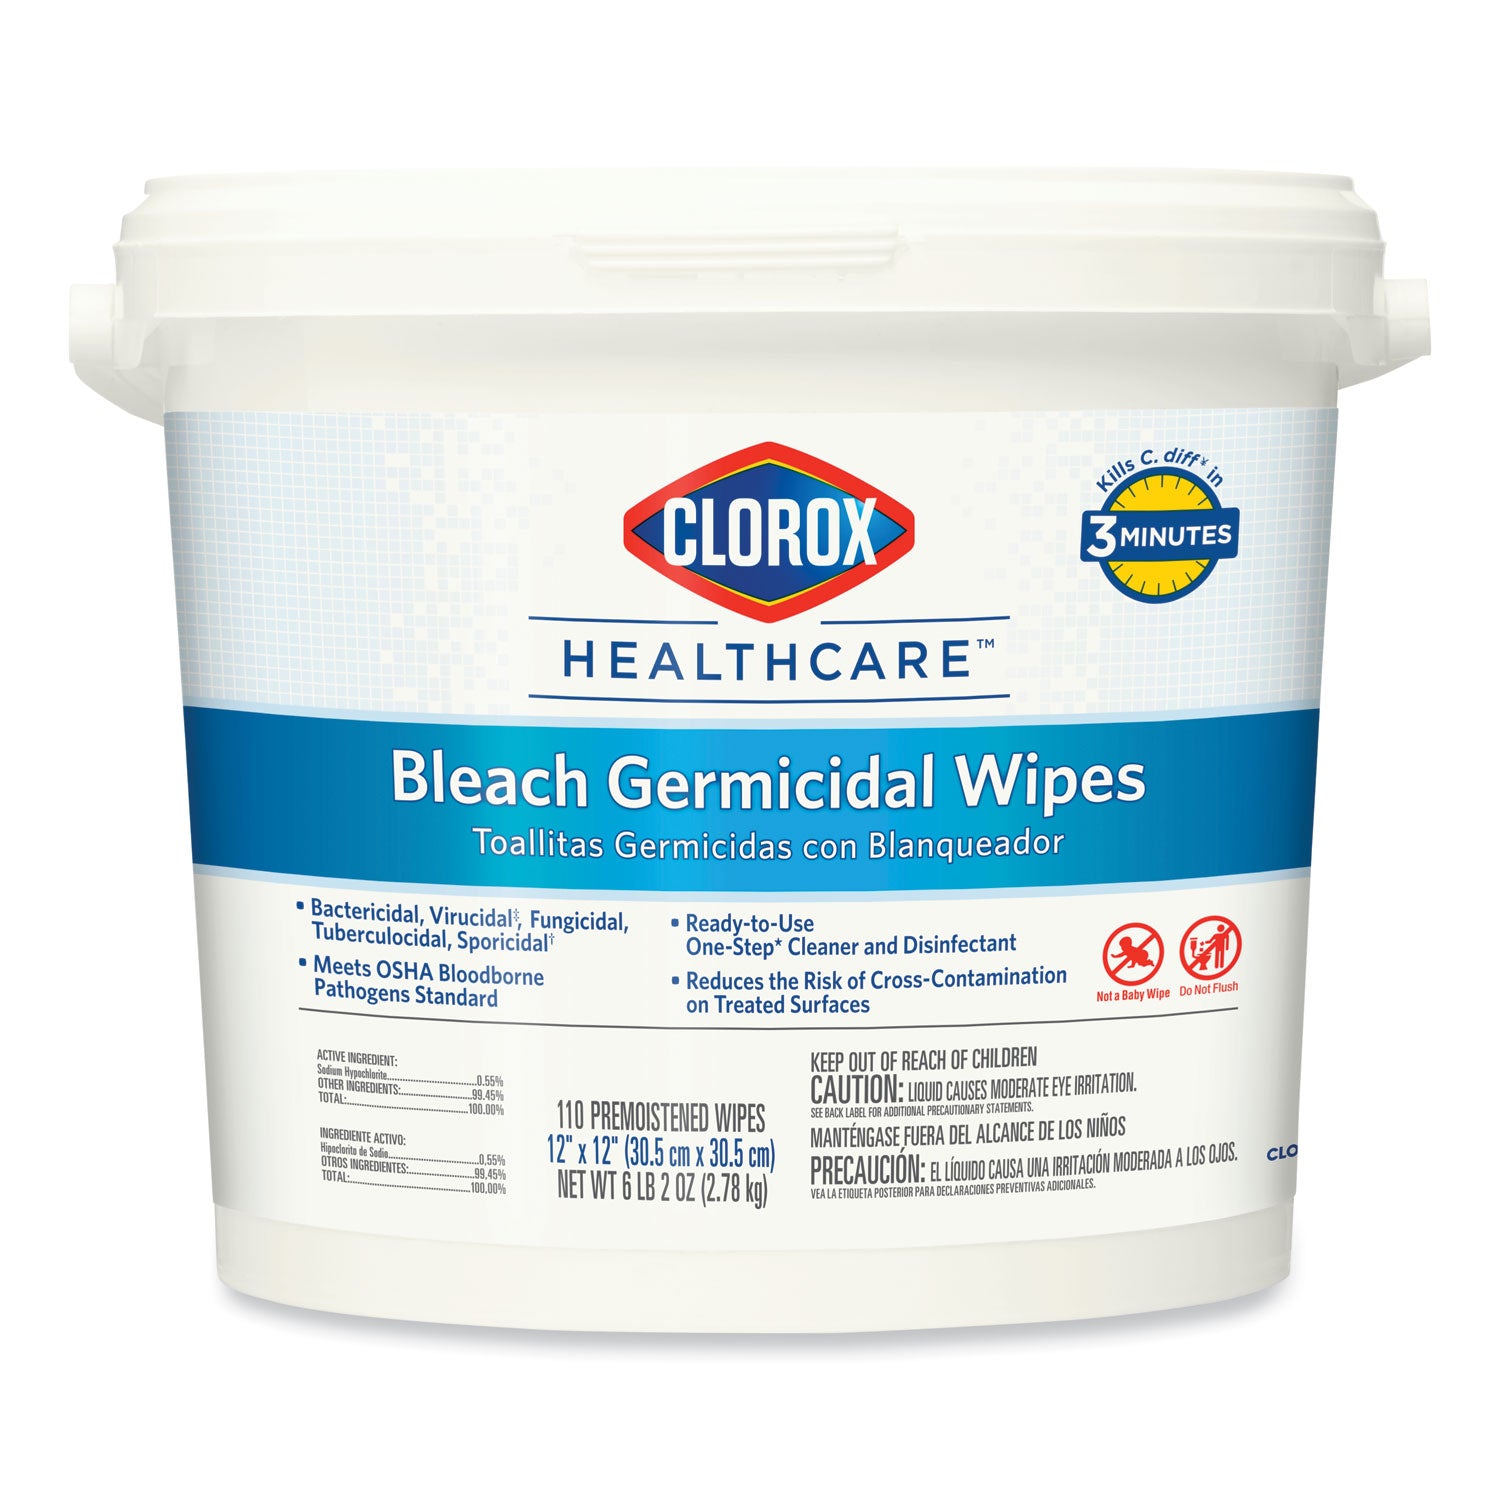 Bleach Germicidal Wipes, 1-Ply, 12 x 12, Unscented, White, 110/Canister, 2 Canisters/Carton - 